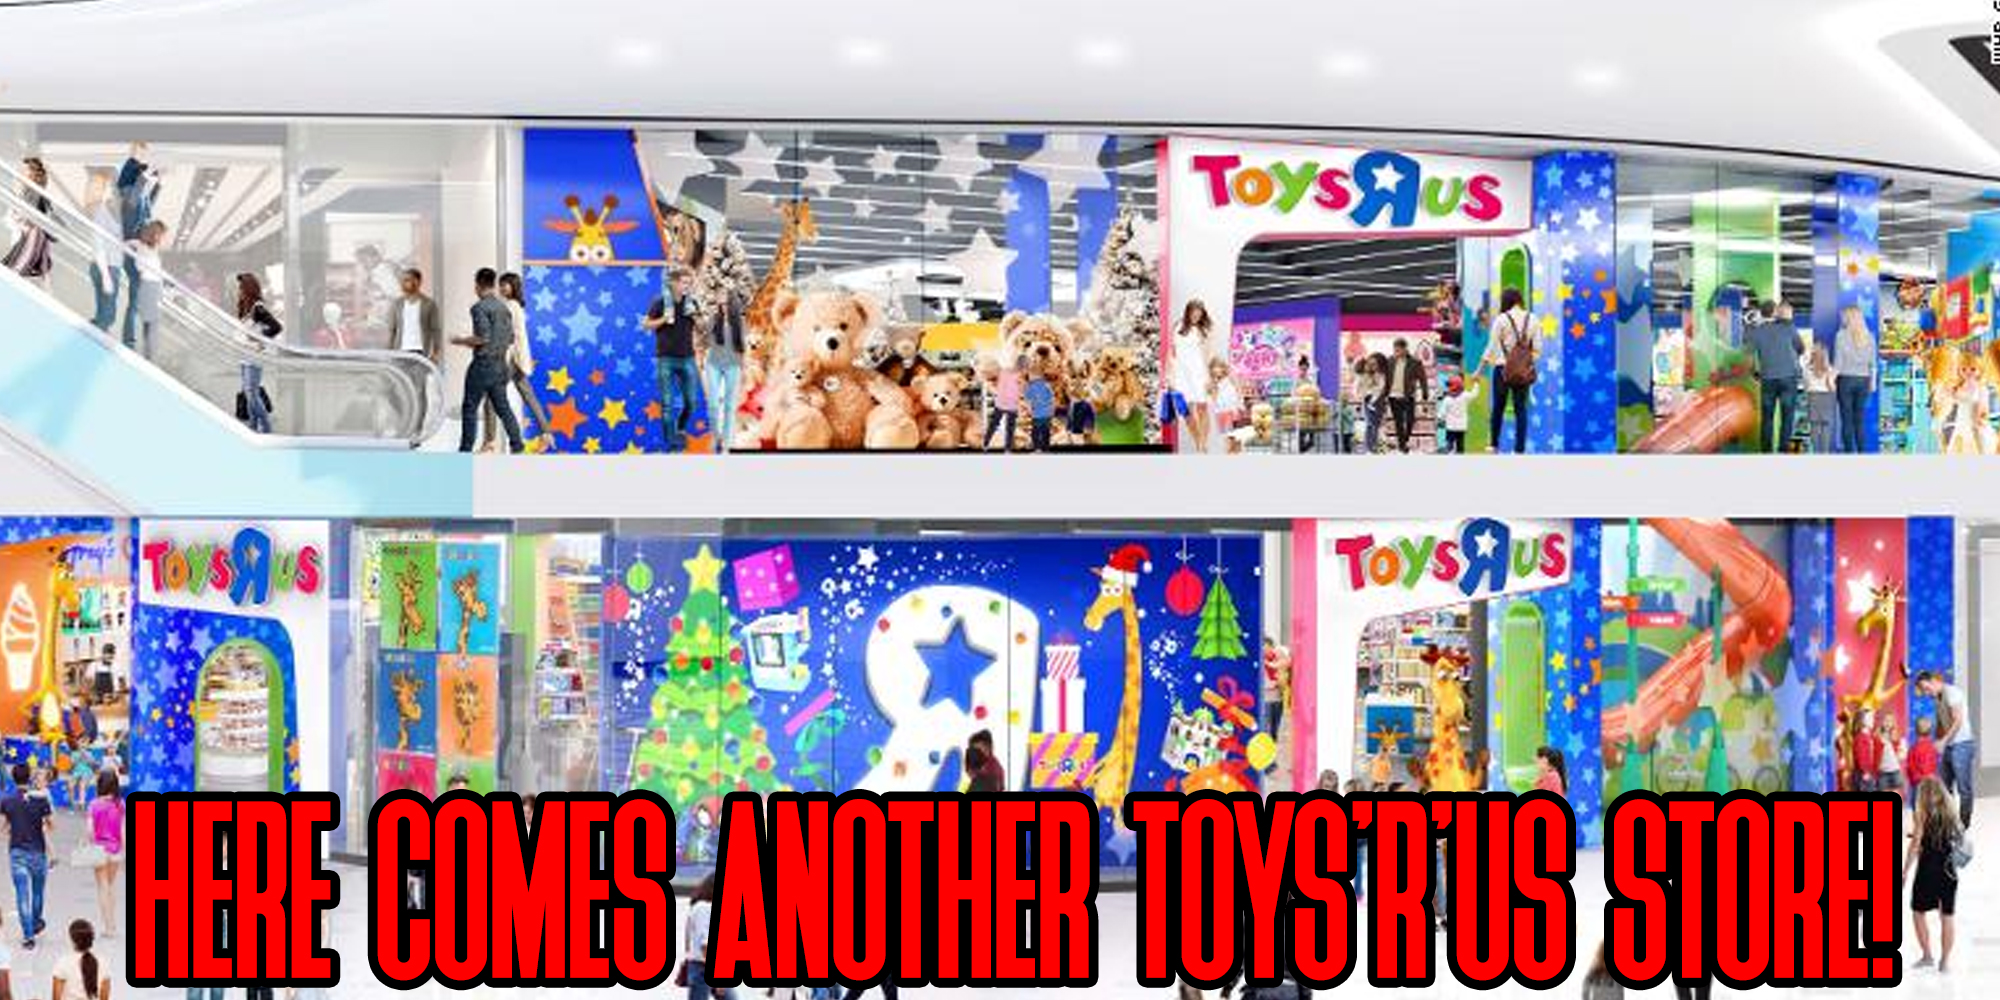 Toys'R'Us Is Back Yet Again! This Time With A 2-Story Store!